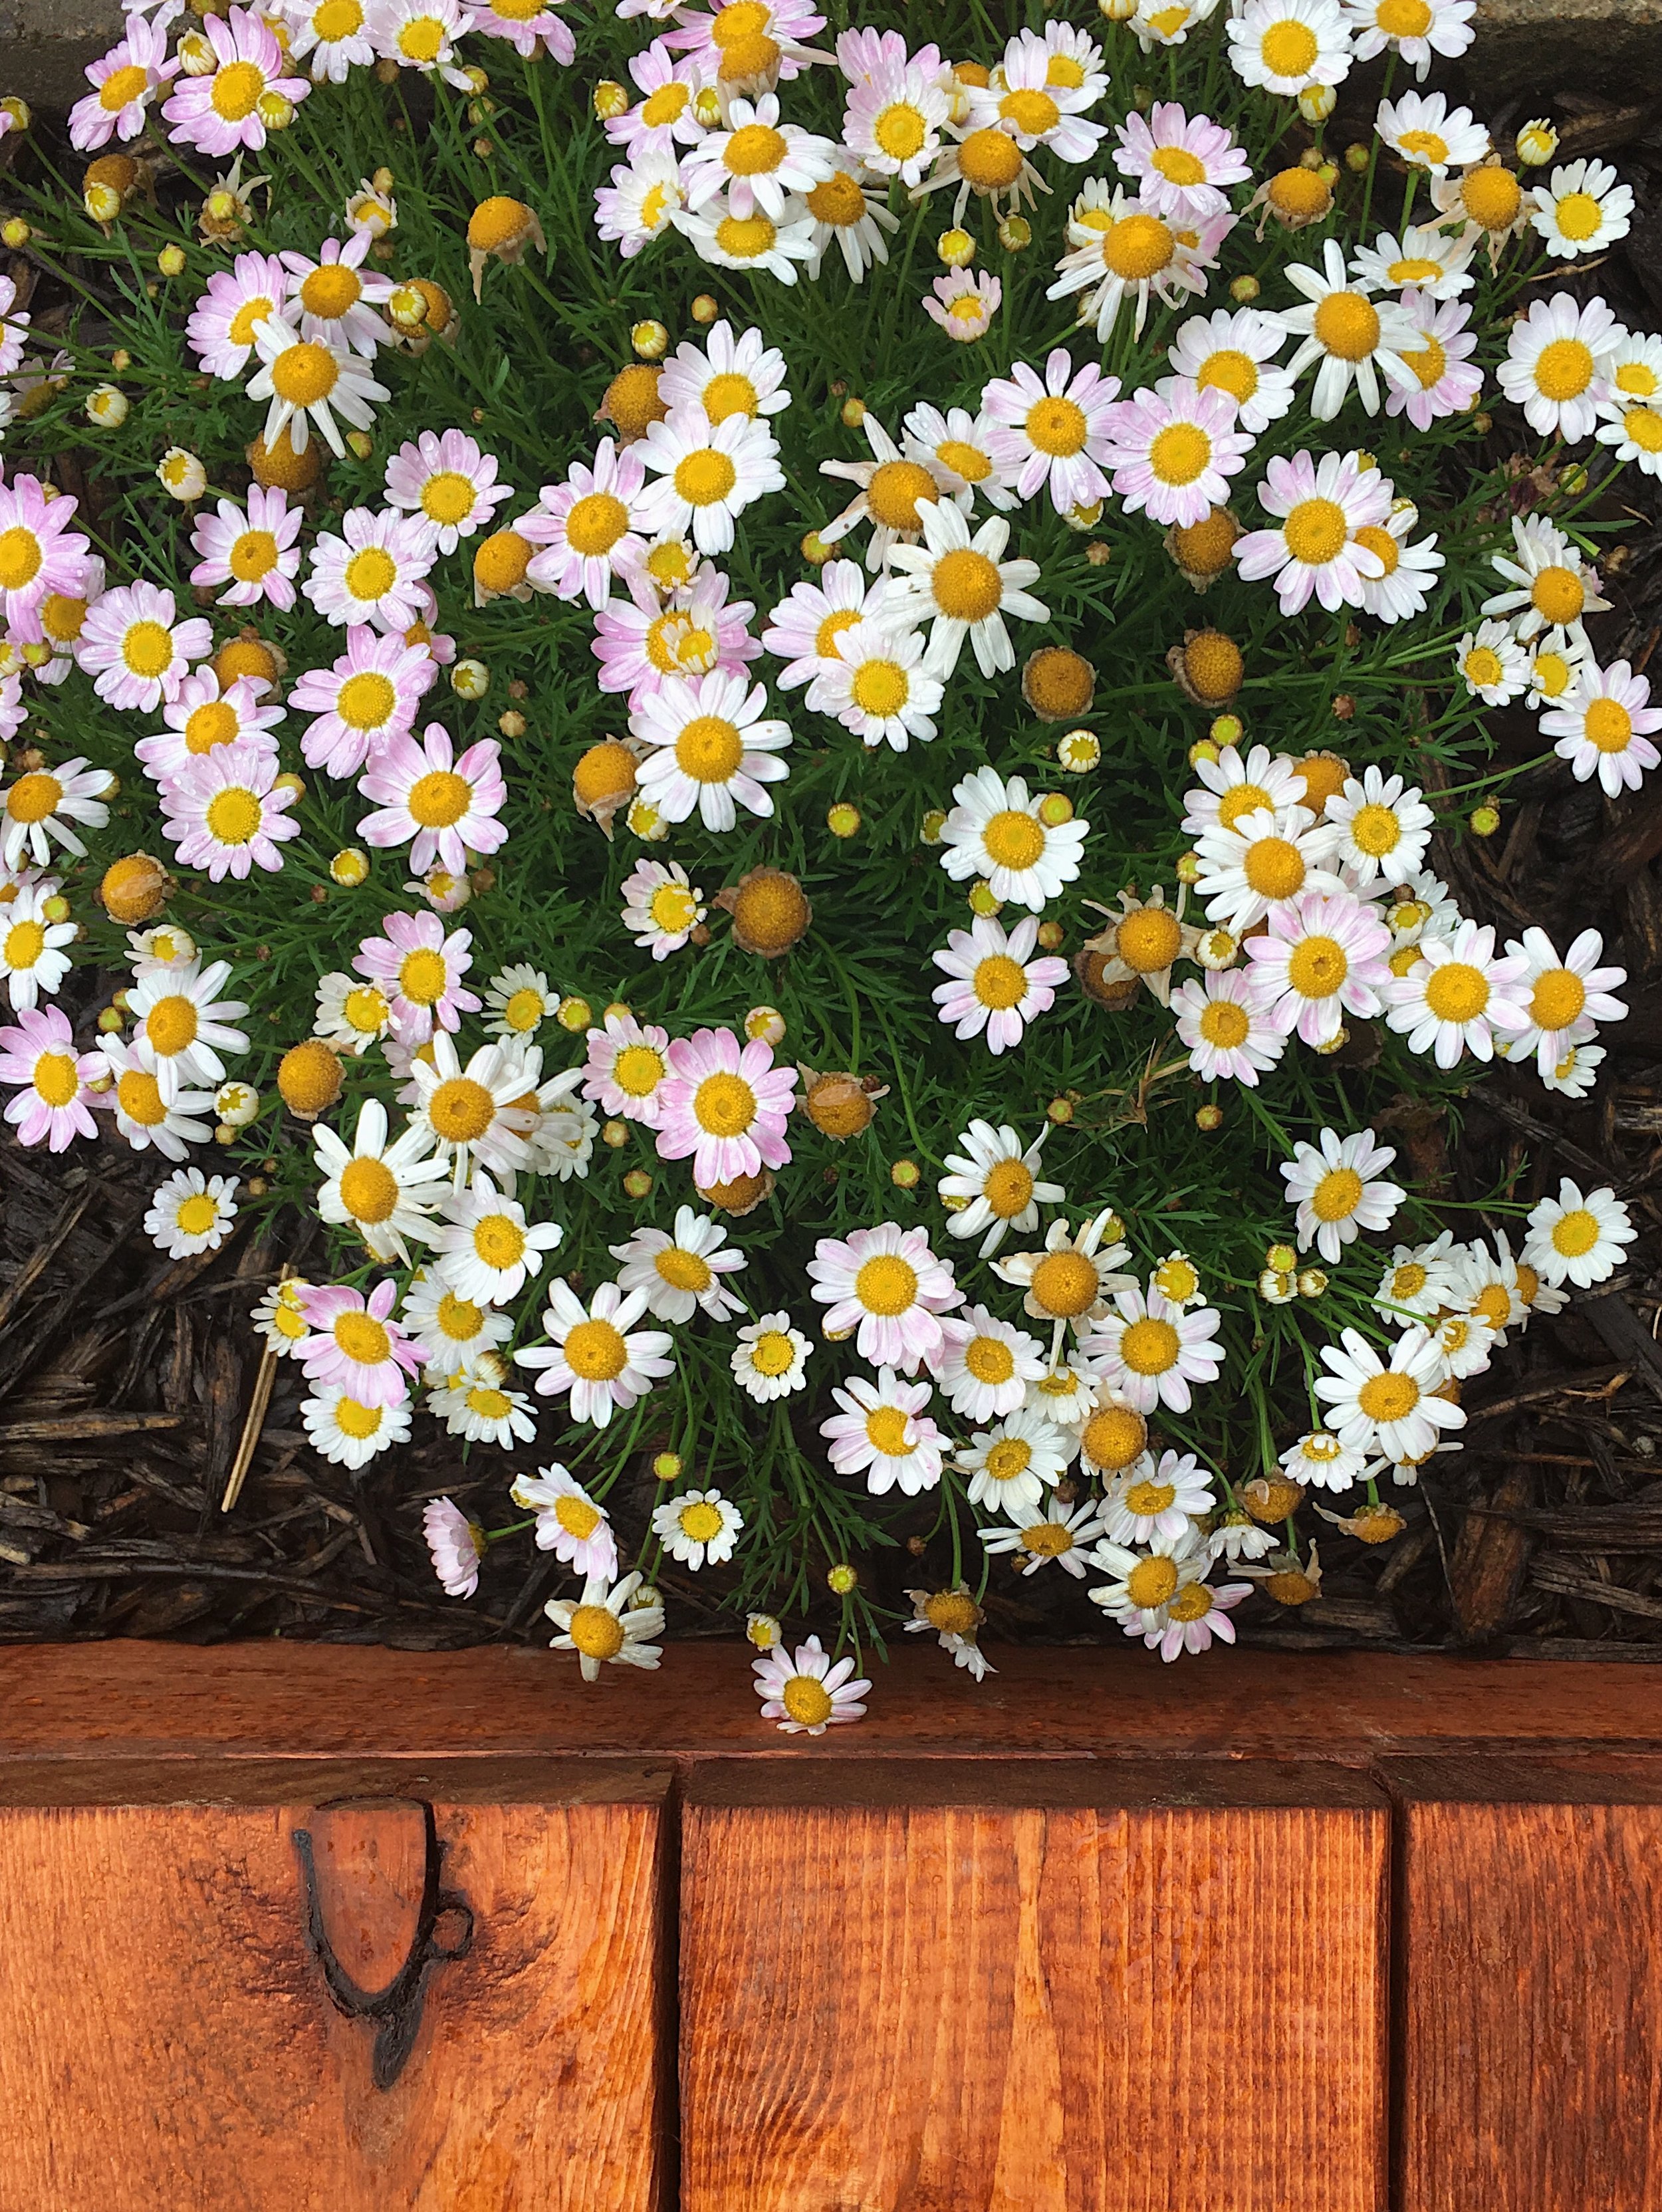 The color changing daisies!